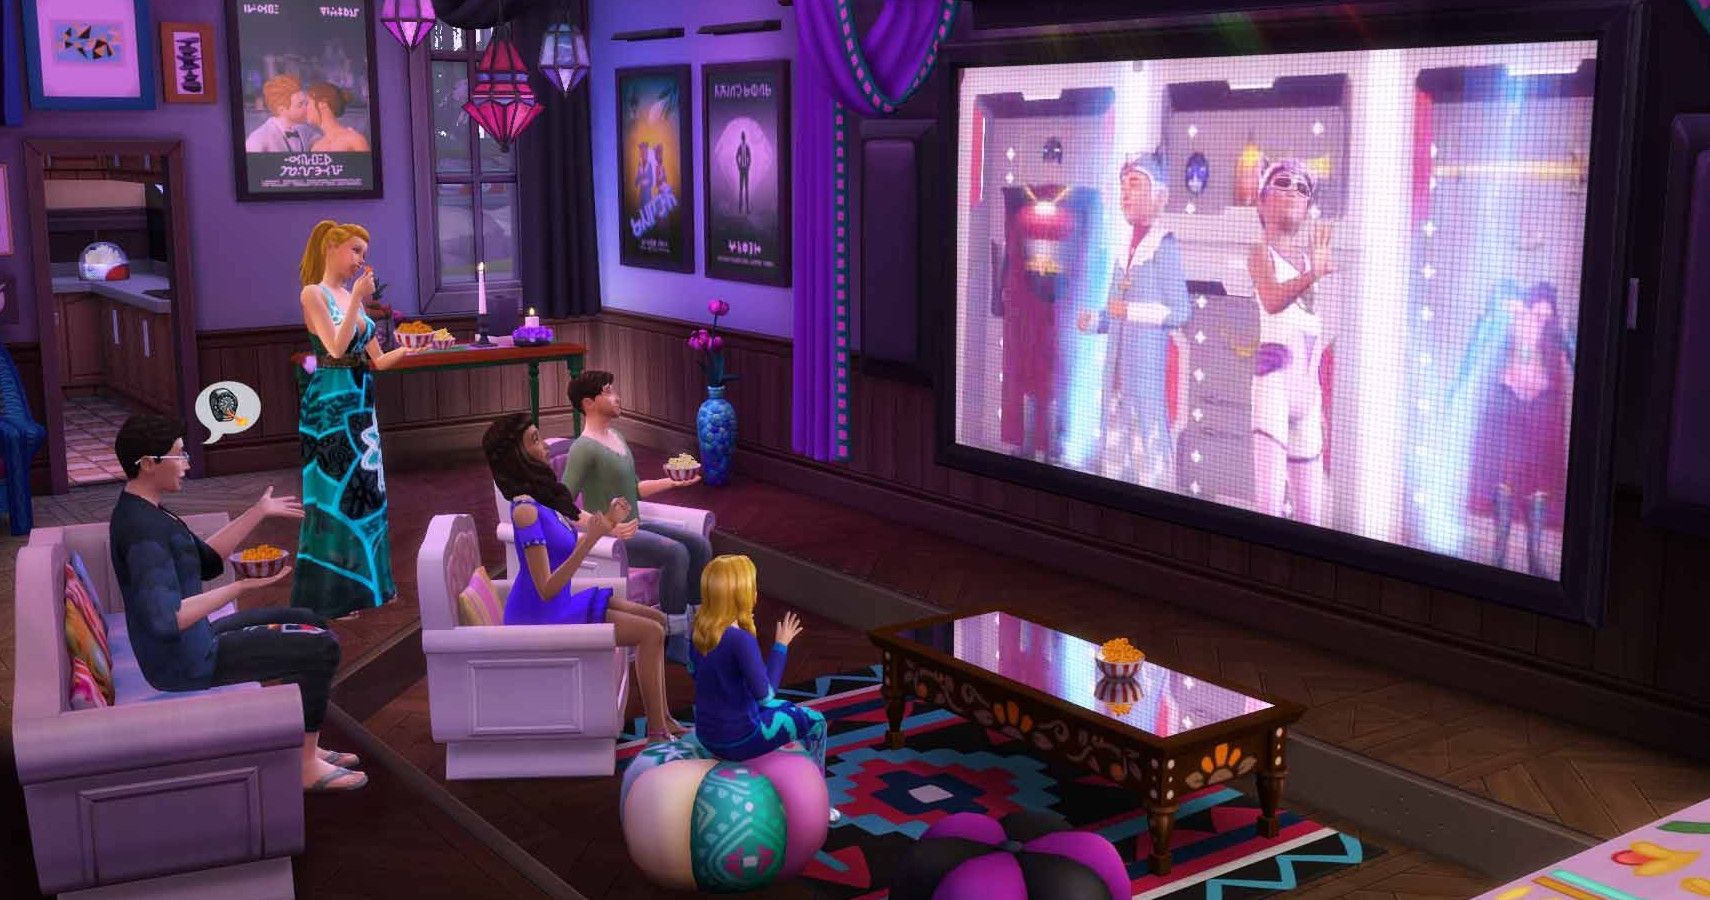 A group of sims watching a movie on a big screen.